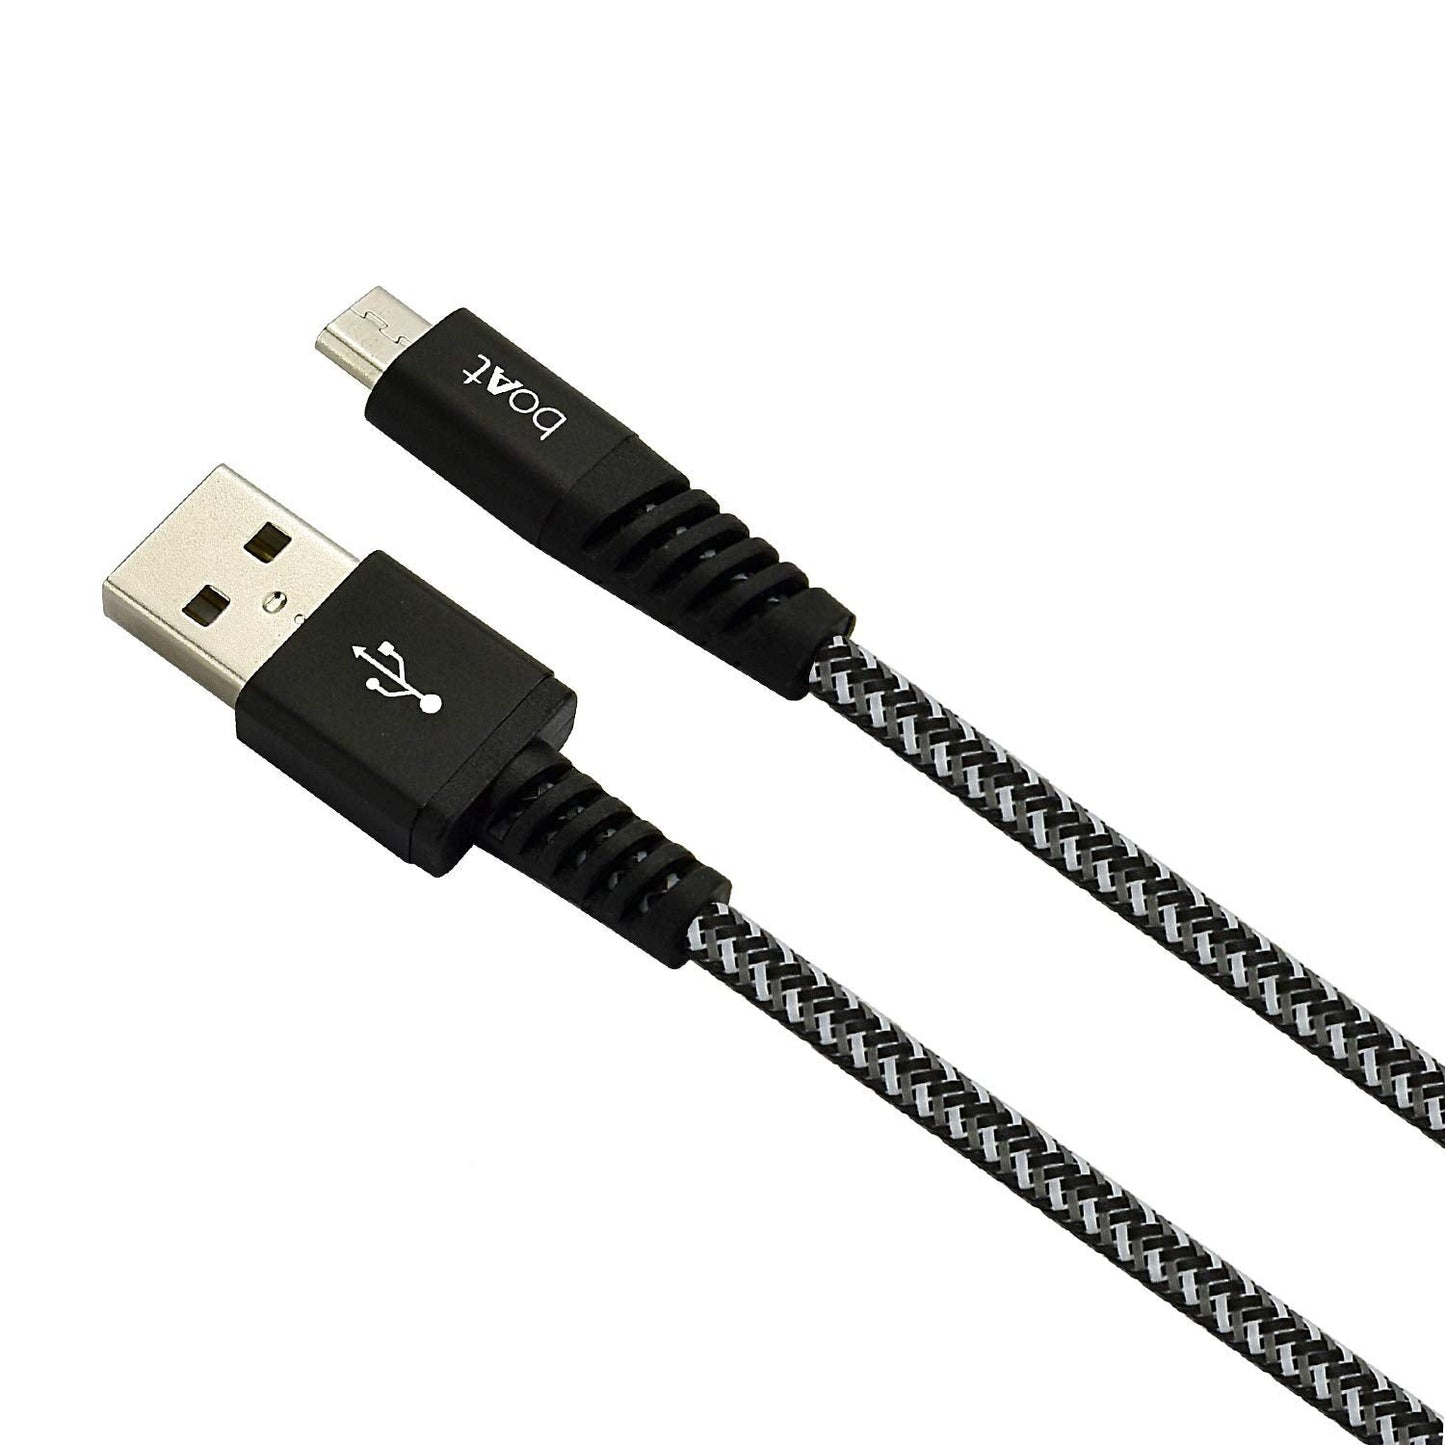 boAt Braided Micro USB Cable 1.5 Meter, Rugged V3 Extra Tough Unbreakable Cable (Black)